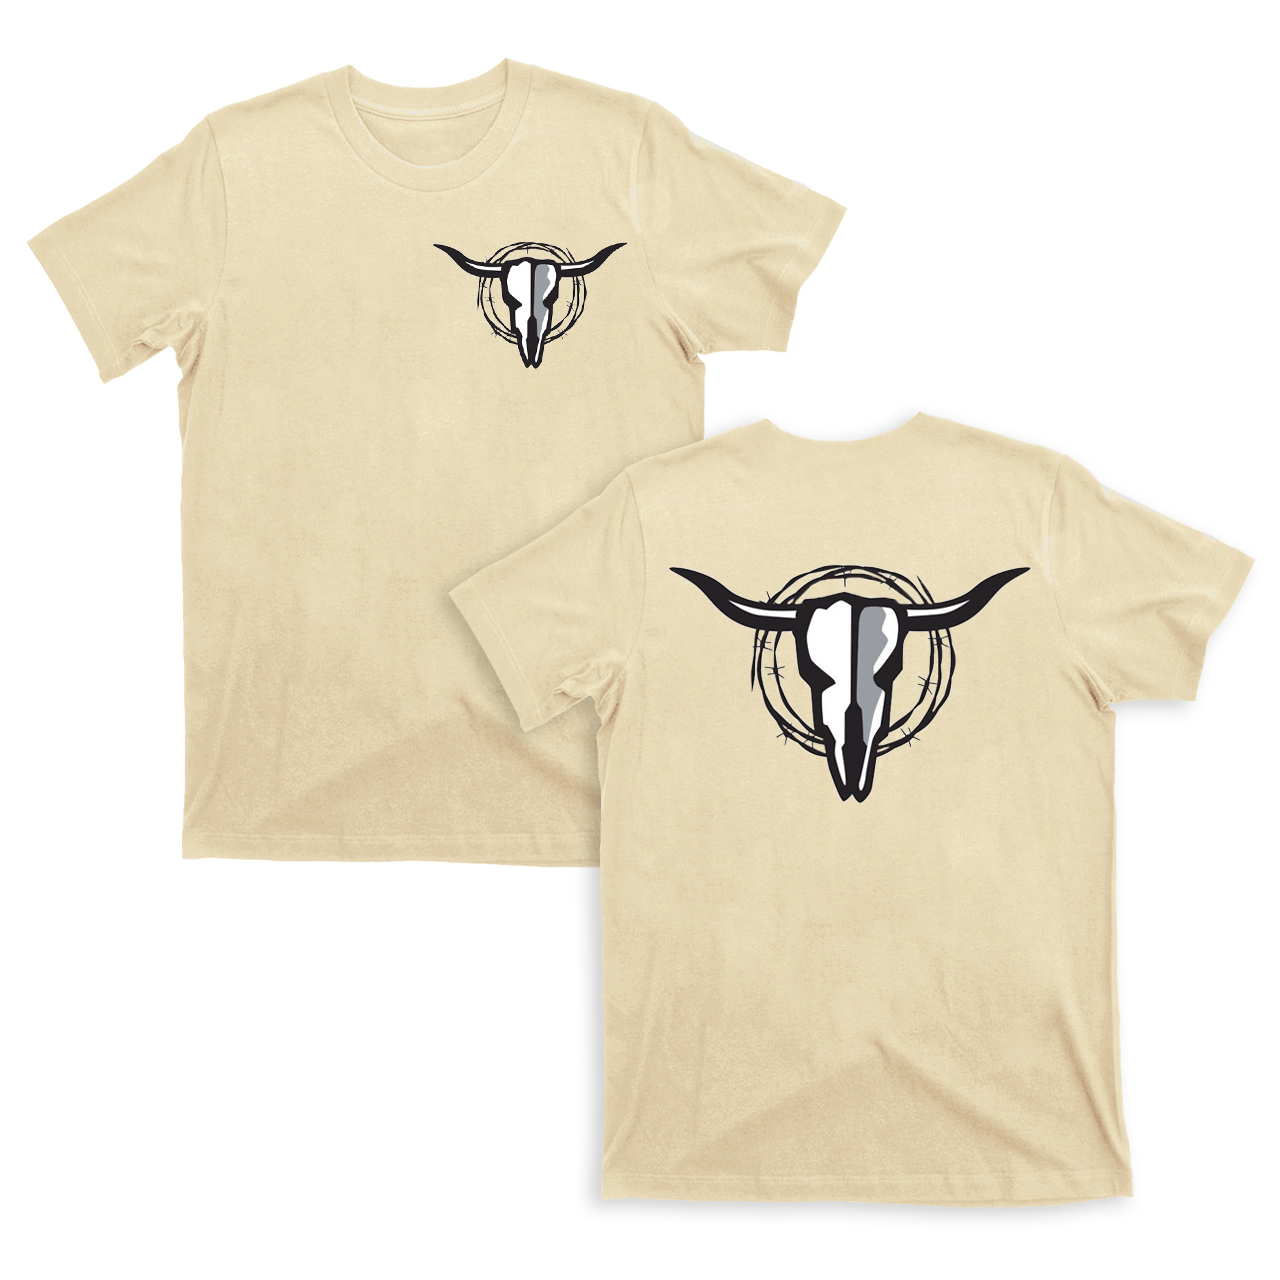 Cow Skull with Barbed Wire T-Shirts